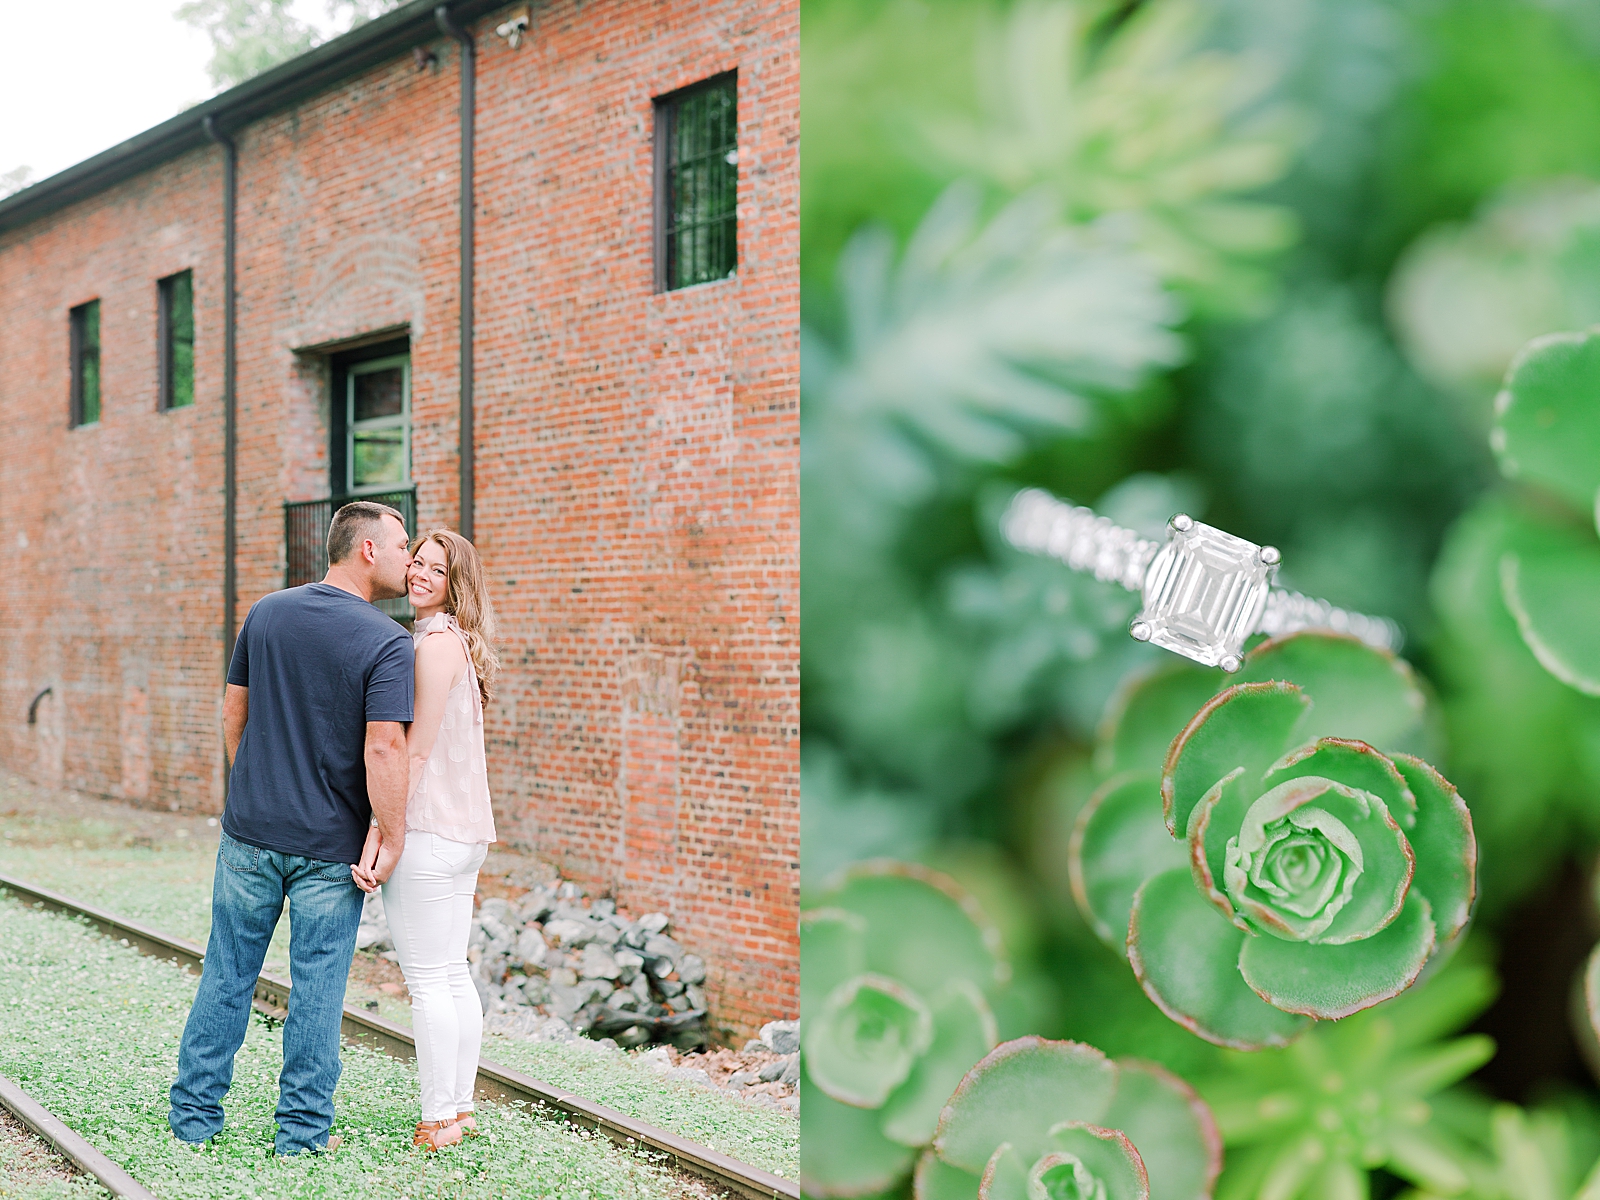  Hackney Warehouse Engagement Session Jake kissing Amanda on cheek and engagement ring detail in succulents Photos